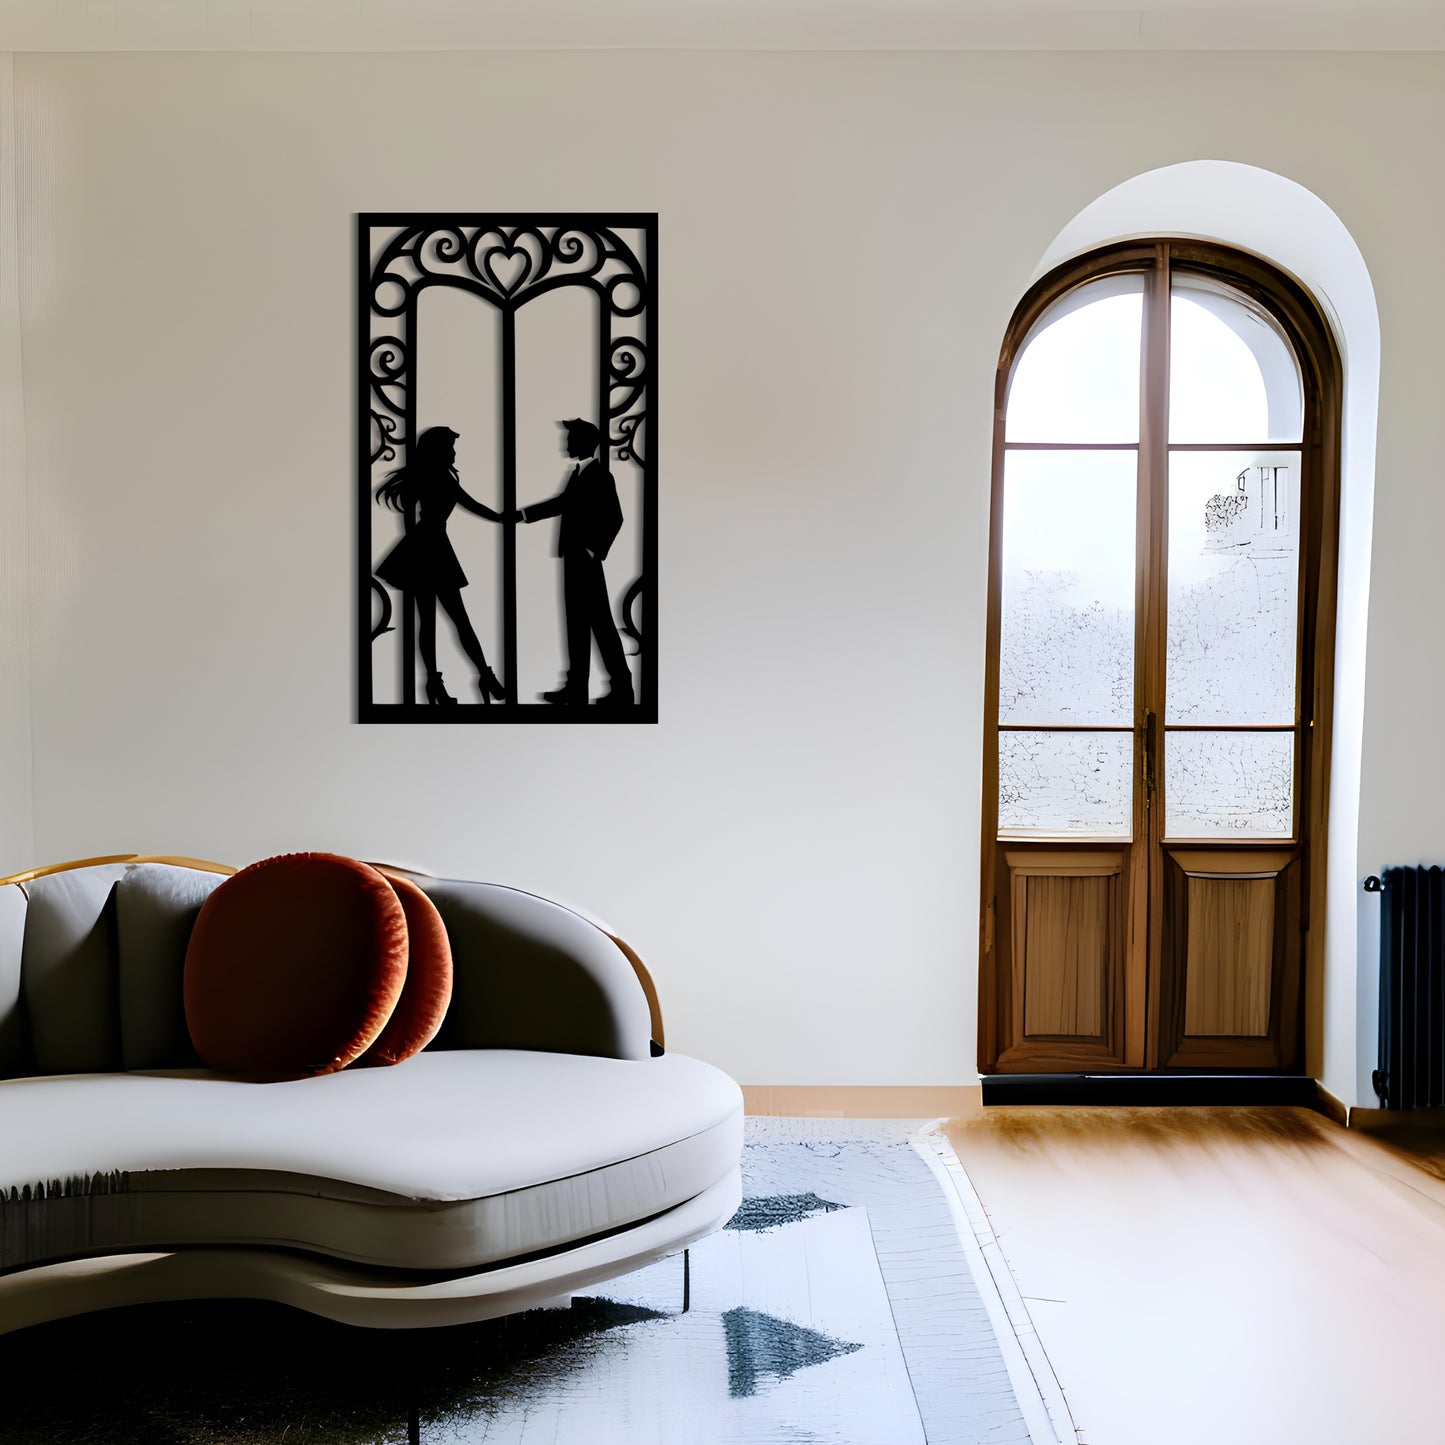 Romantic Silhouette of a Man and a Woman Wall Decor